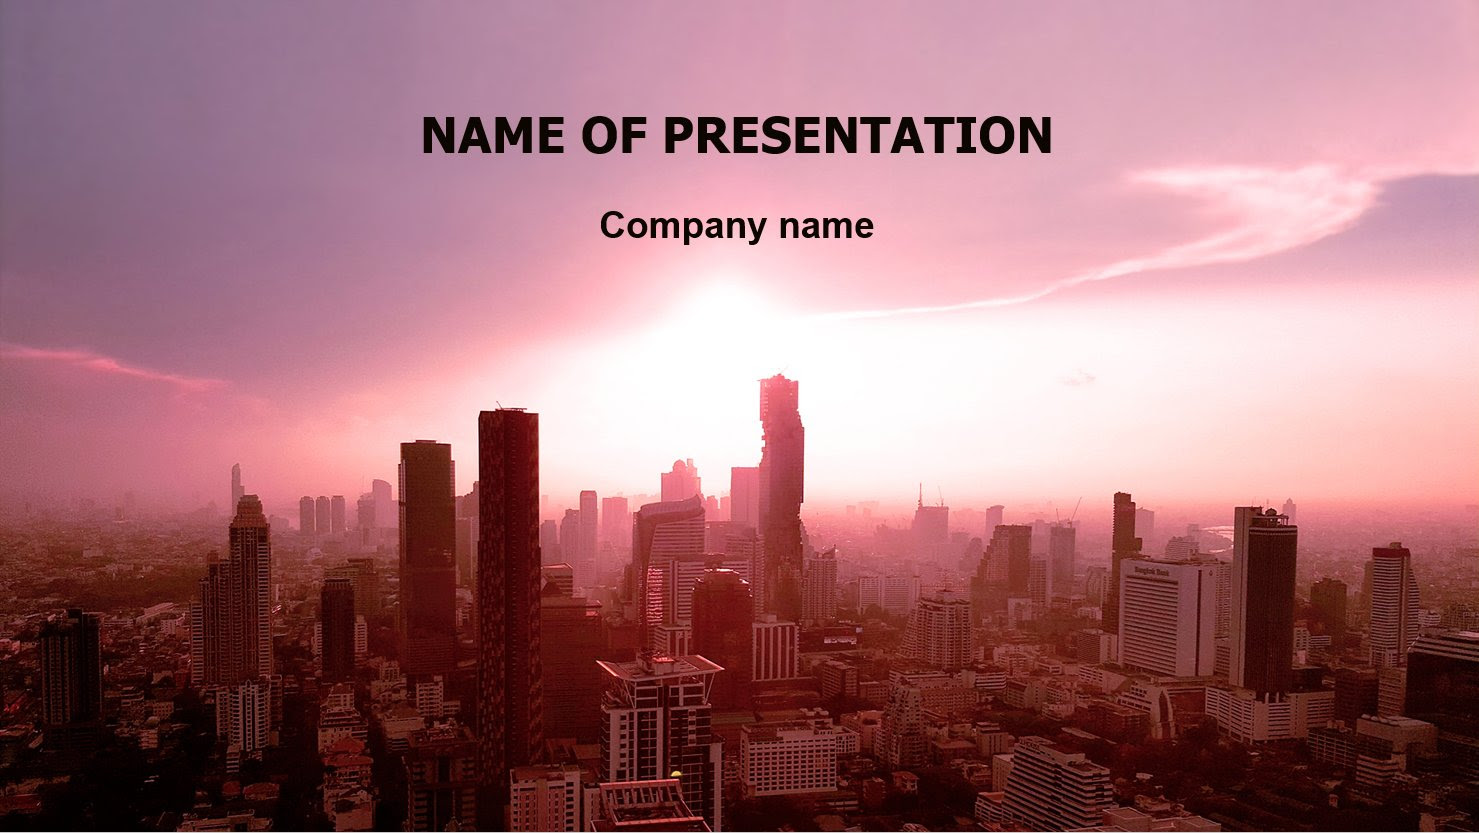 Download city powerpoint templates for business and create your smart presentation with color blue that give an impression calm and relaxed. Download Free Purple City Powerpoint Template For Presentation